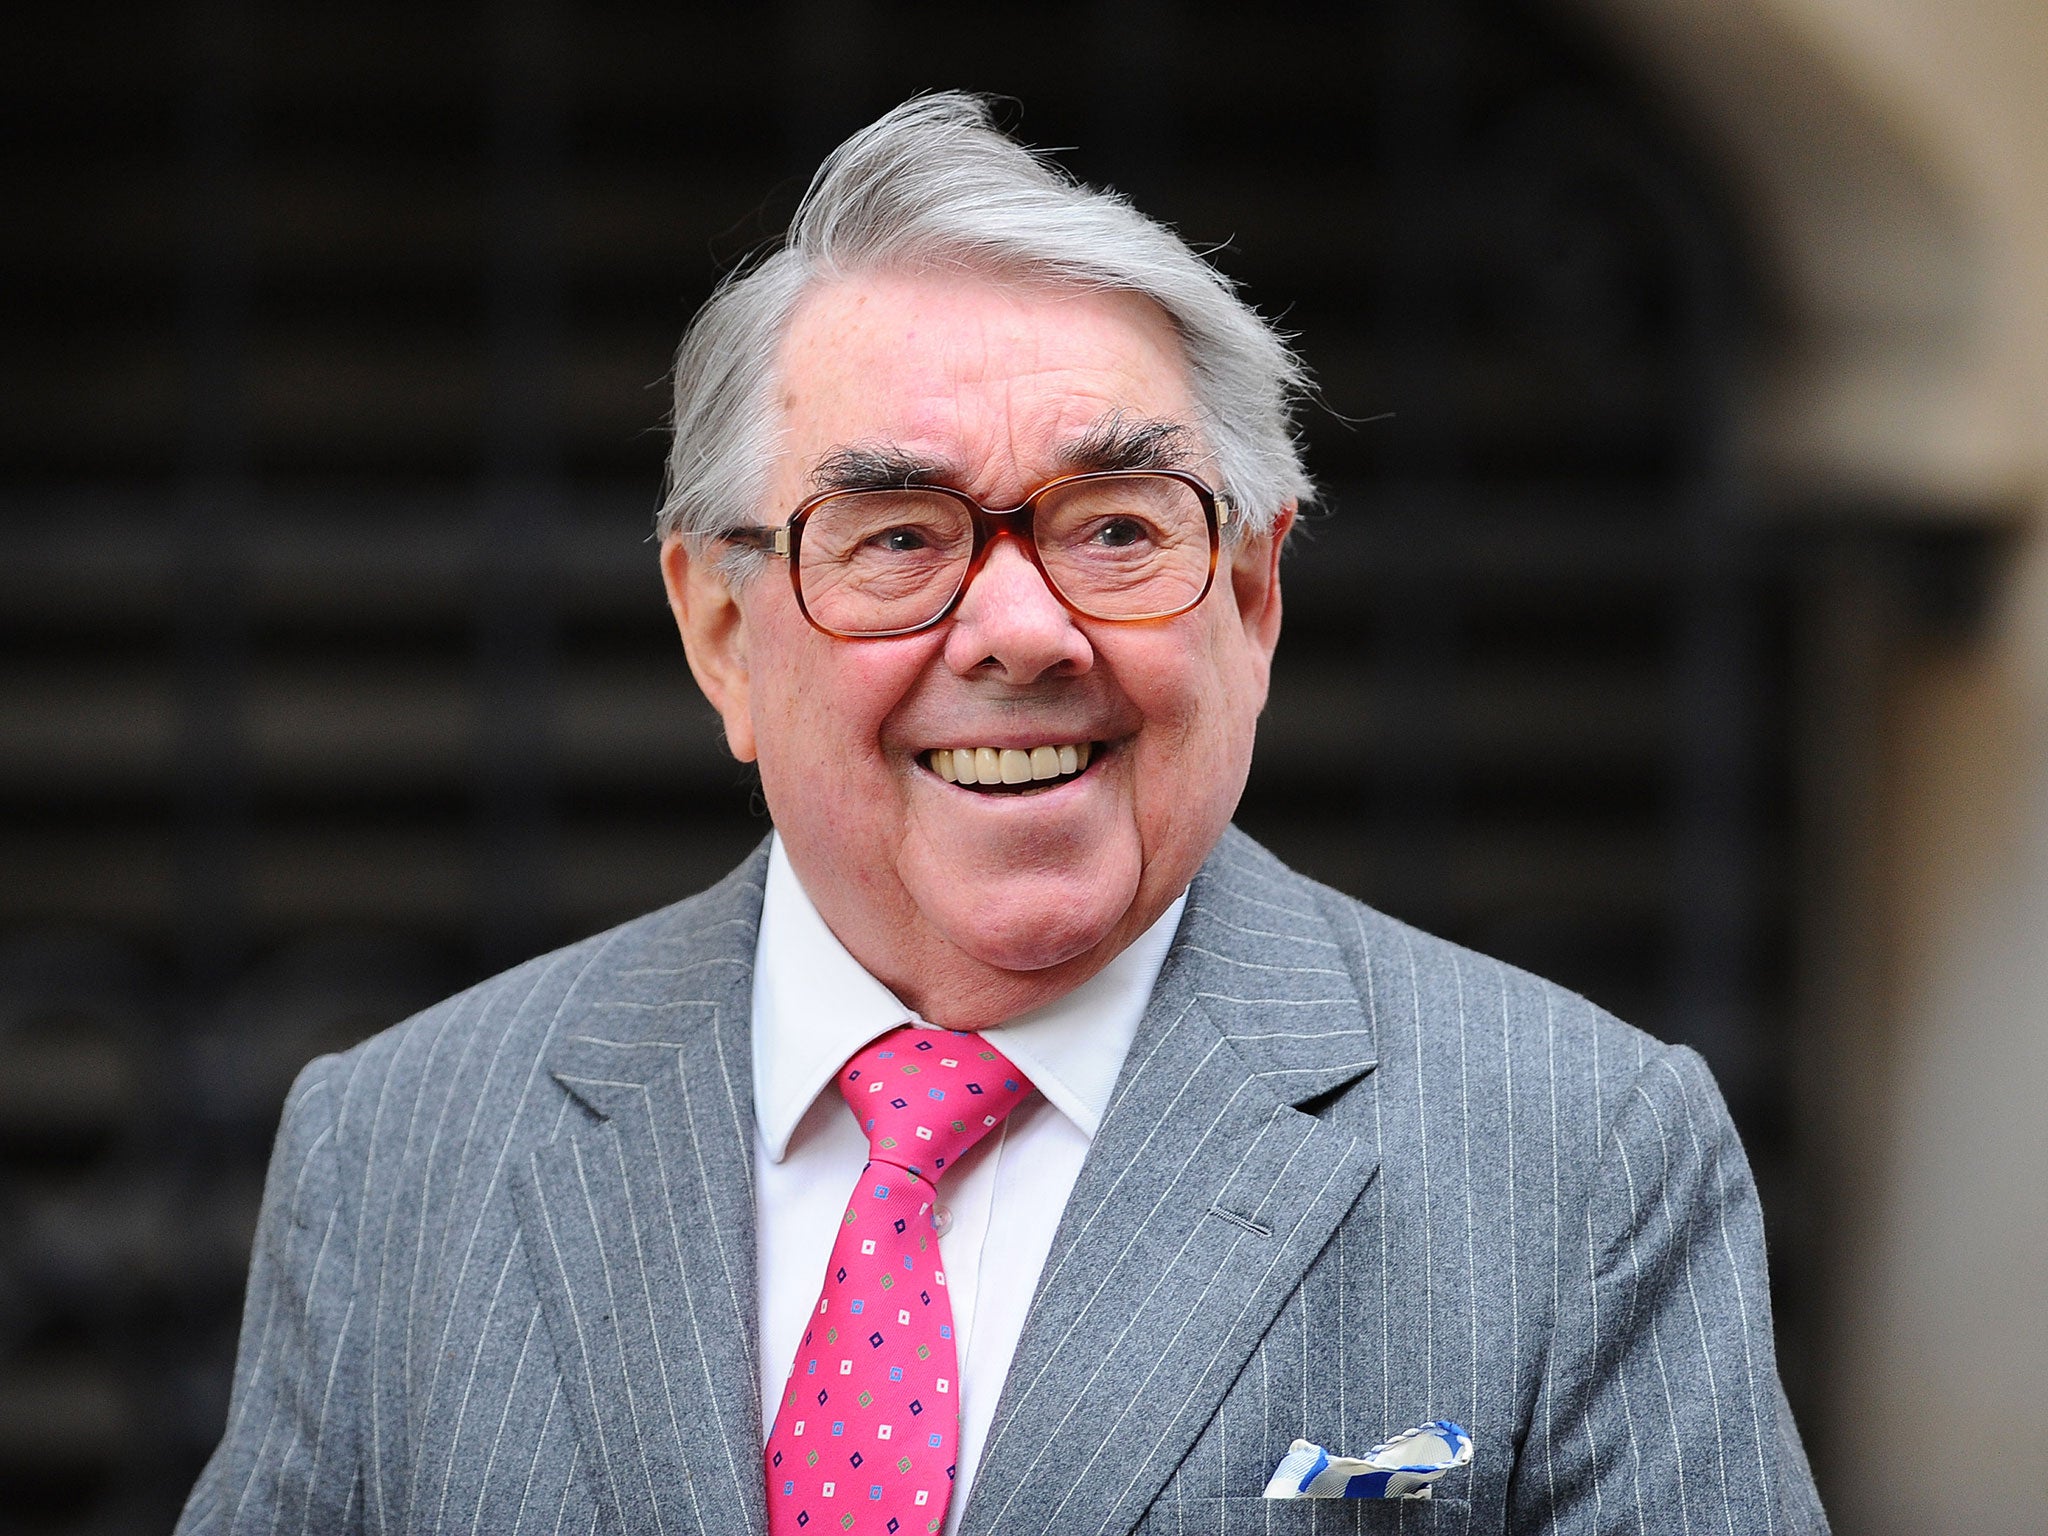 What is the condition that Ronnie Corbett had and are there any cures?